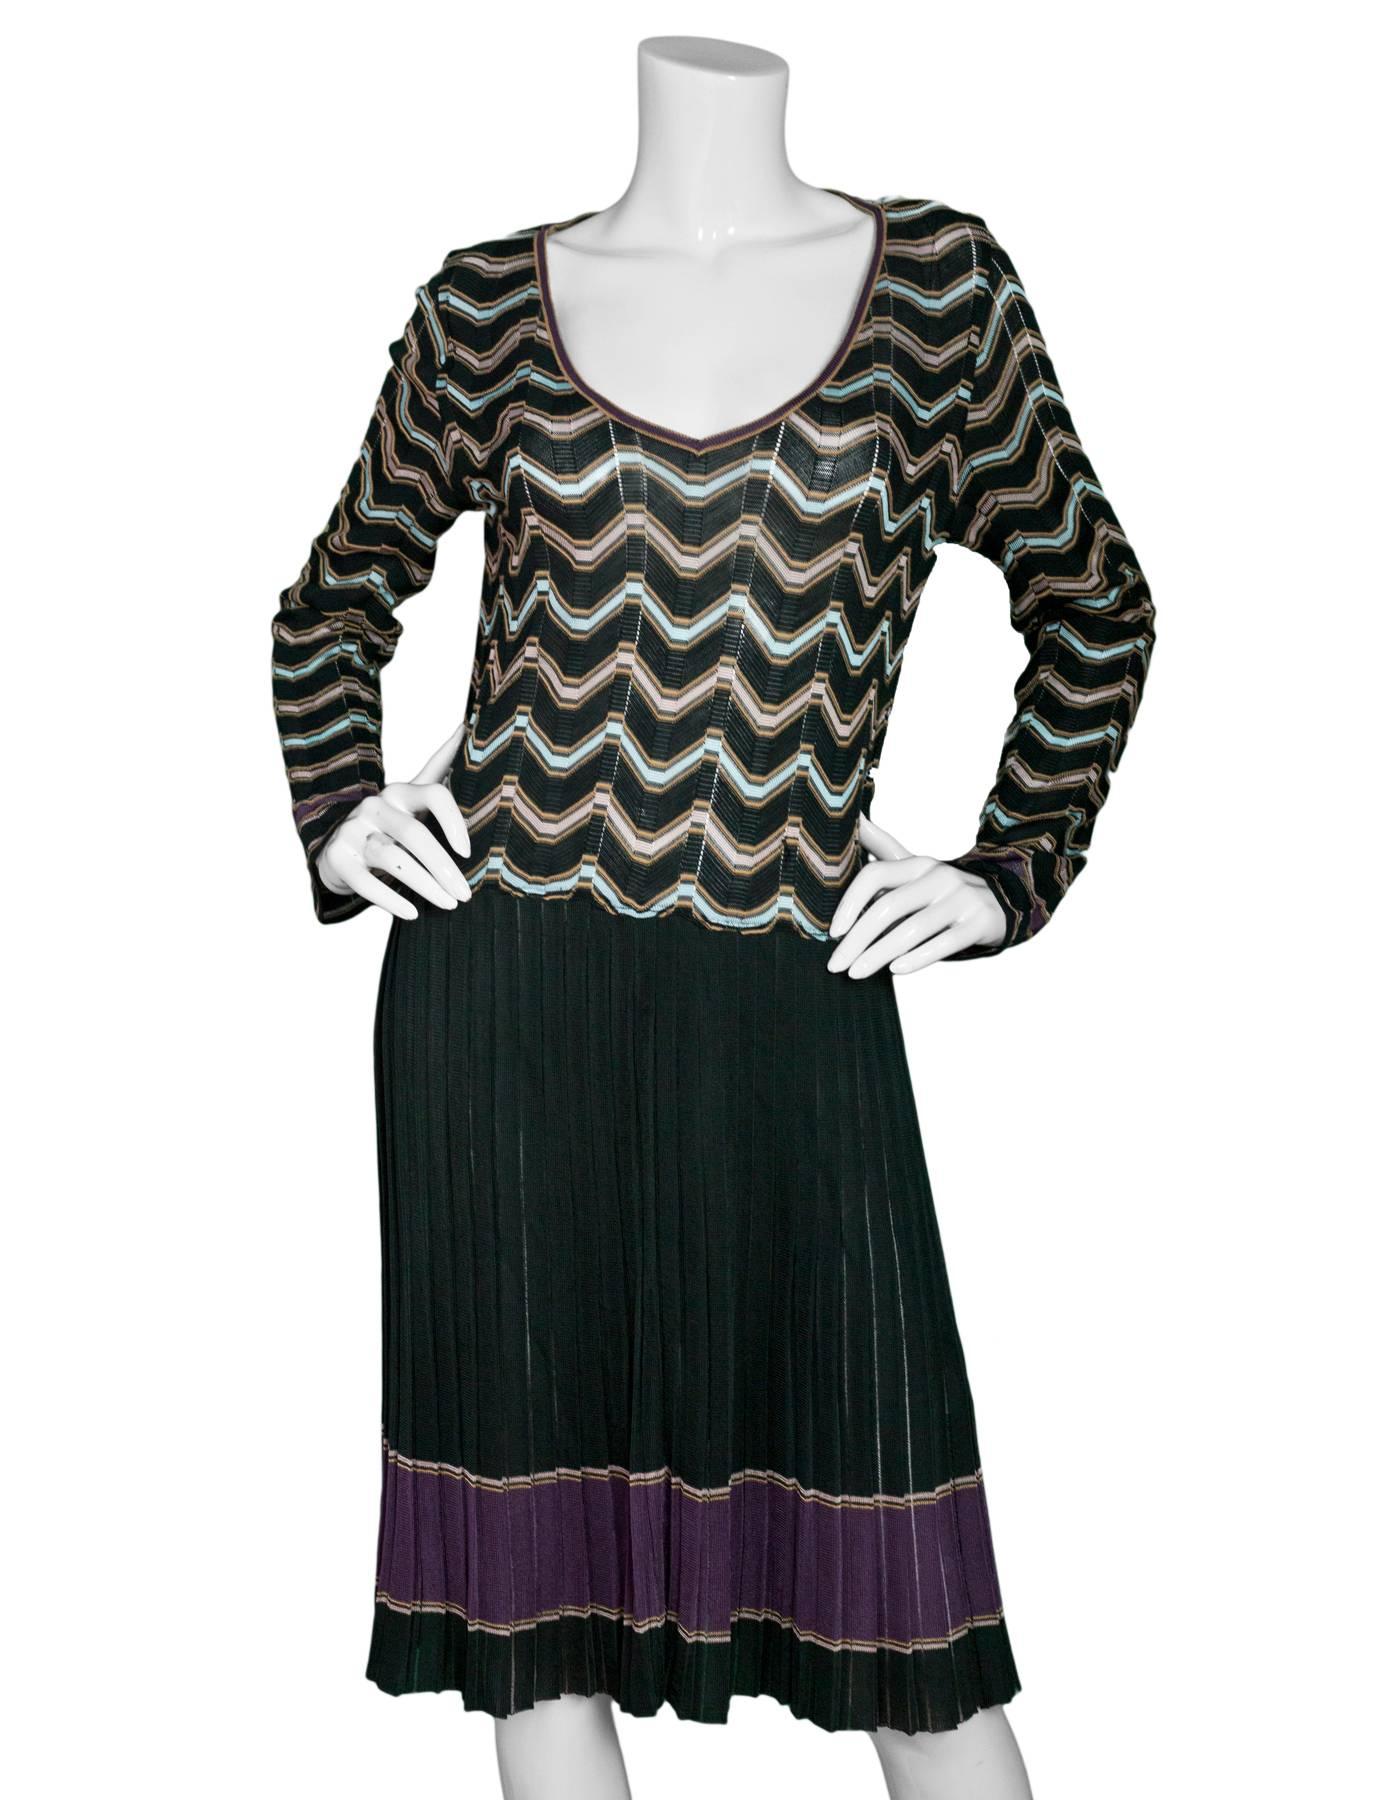 M Missoni Green, Blue & Tan V-Neck Pleated Dress Sz IT48

Made In: China
Color: Green, blue, tan
Composition: 61% viscose, 39% wool
Lining: None
Closure/Opening: Pull over 
Exterior Pockets: None
Interior Pockets: None
Overall Condition: Very good